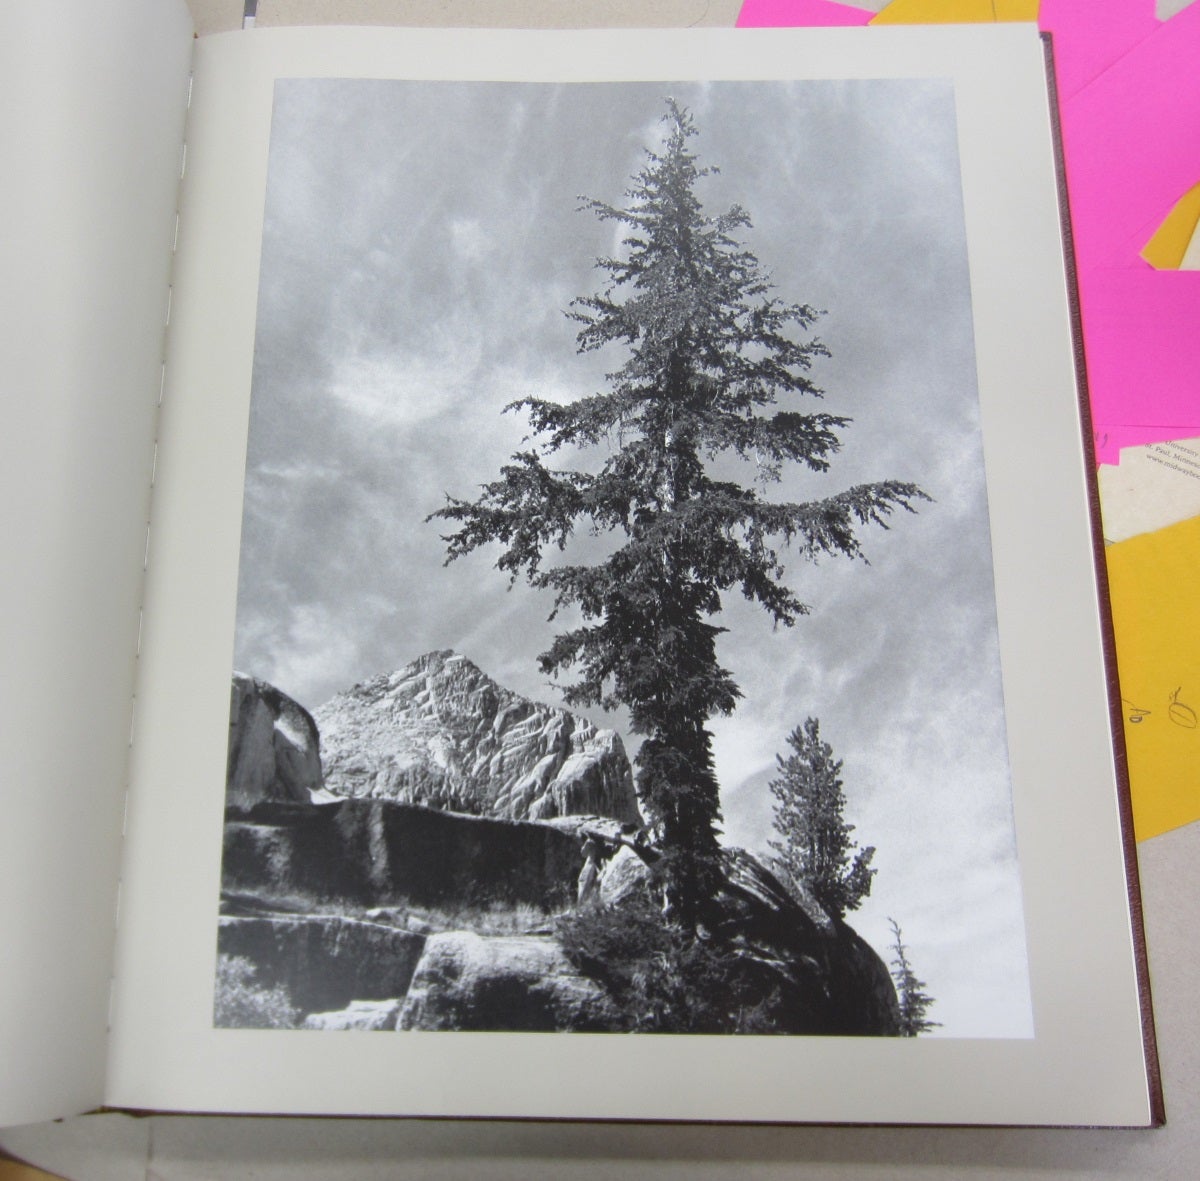 Ansel Adams: Landscapes of the American West by Lauris Morgan-Griffiths on  Midway Book Store